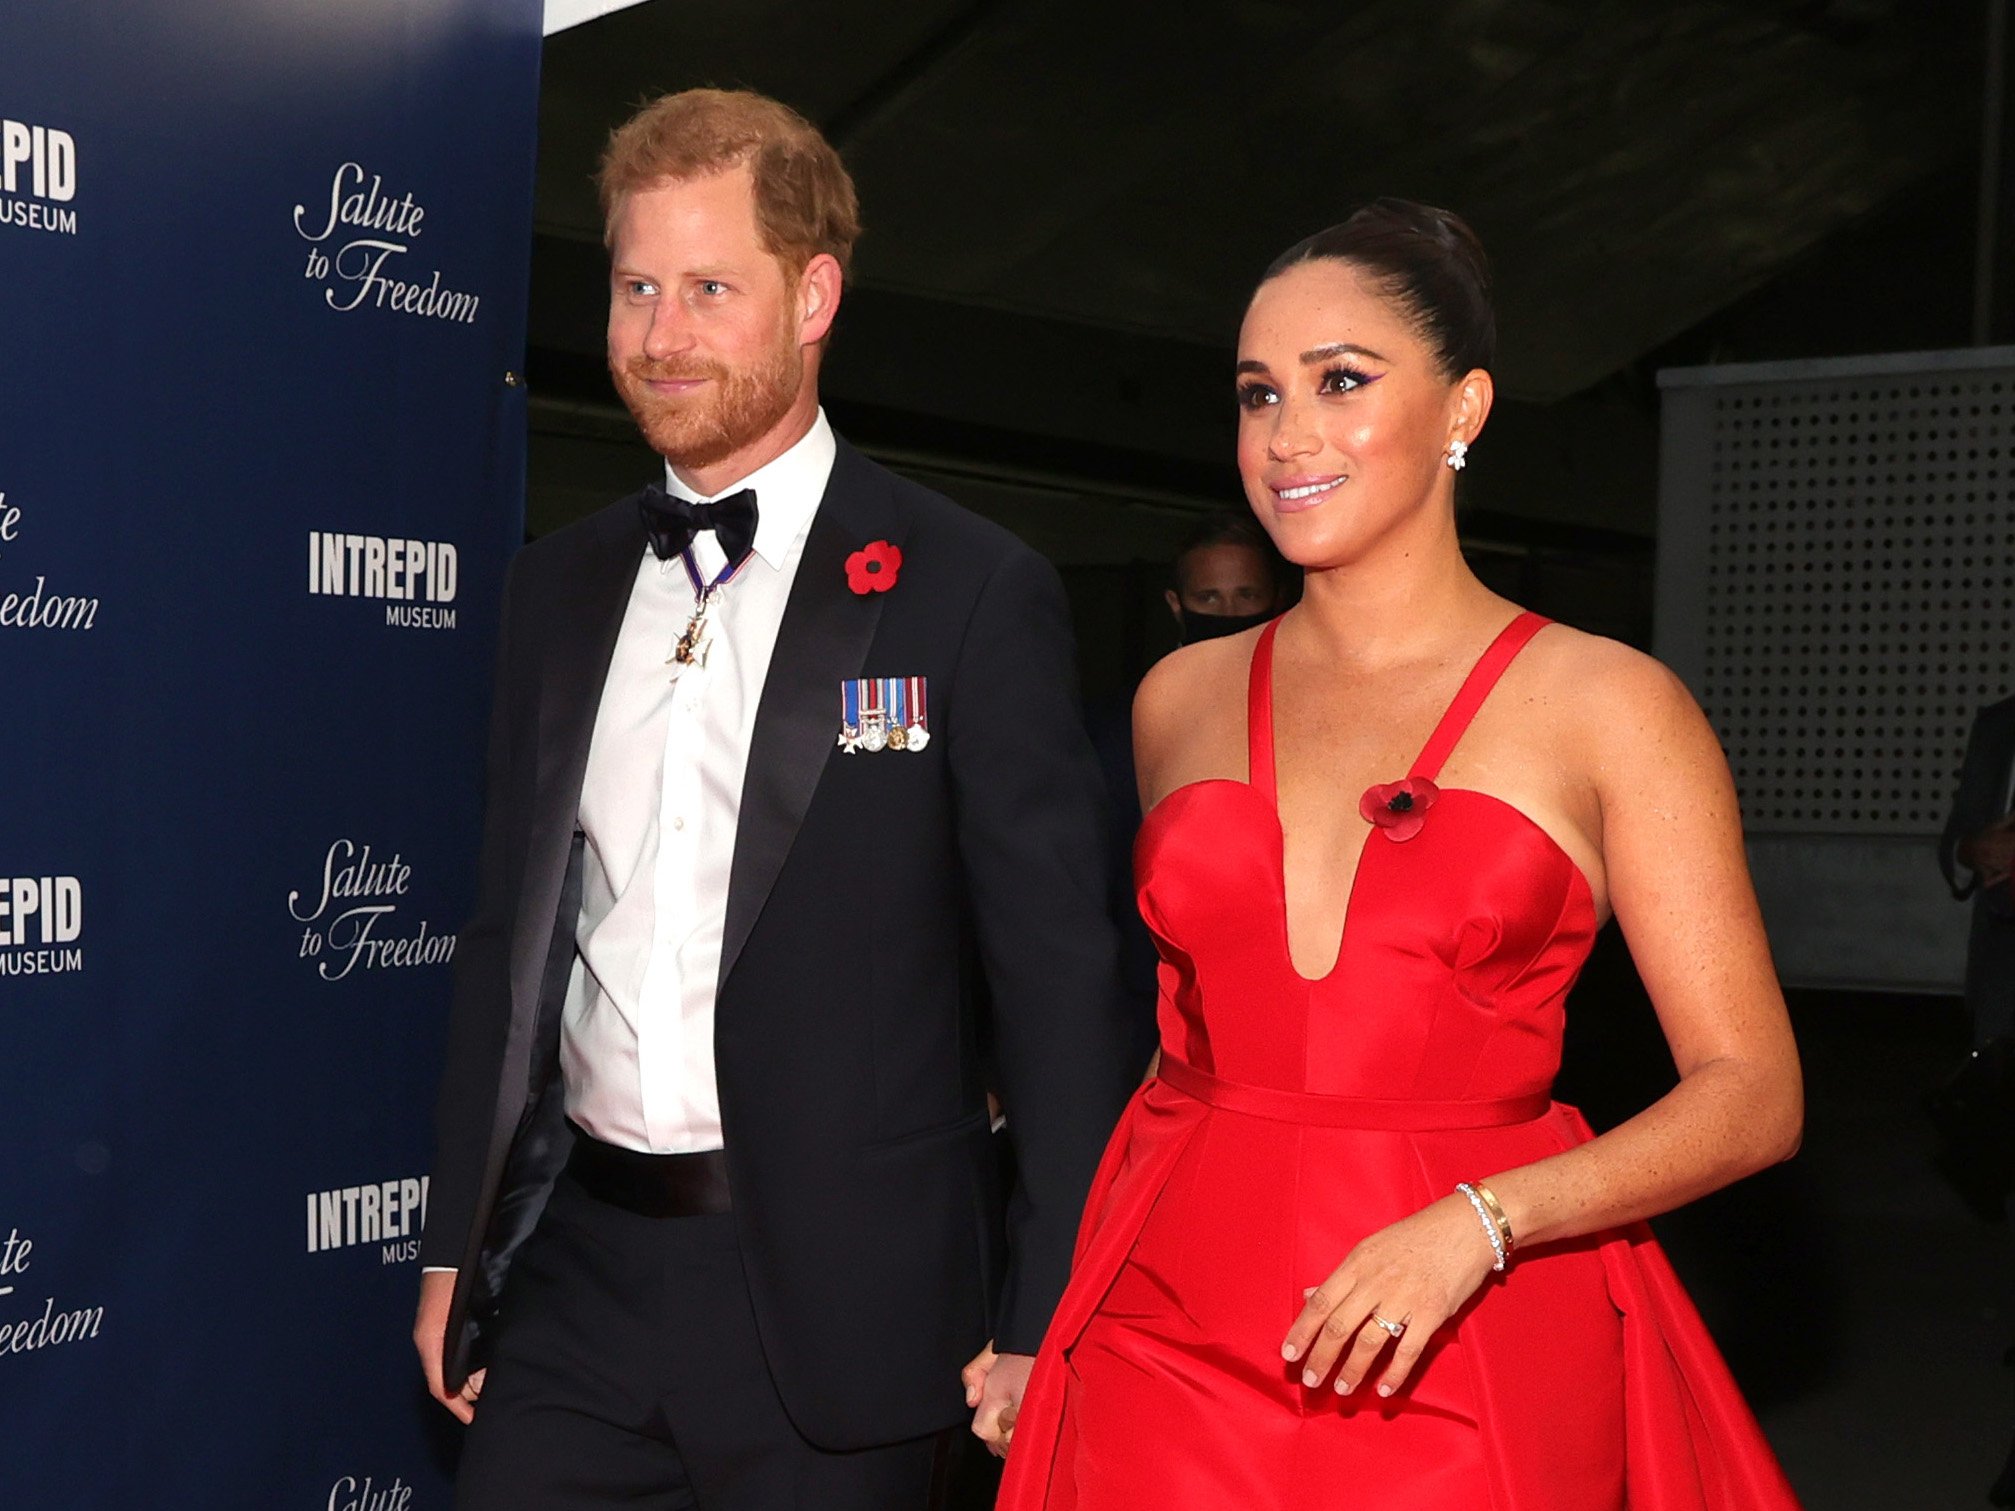 Prince Harry, Duke of Sussex and Meghan Markle, Duchess of Sussex 